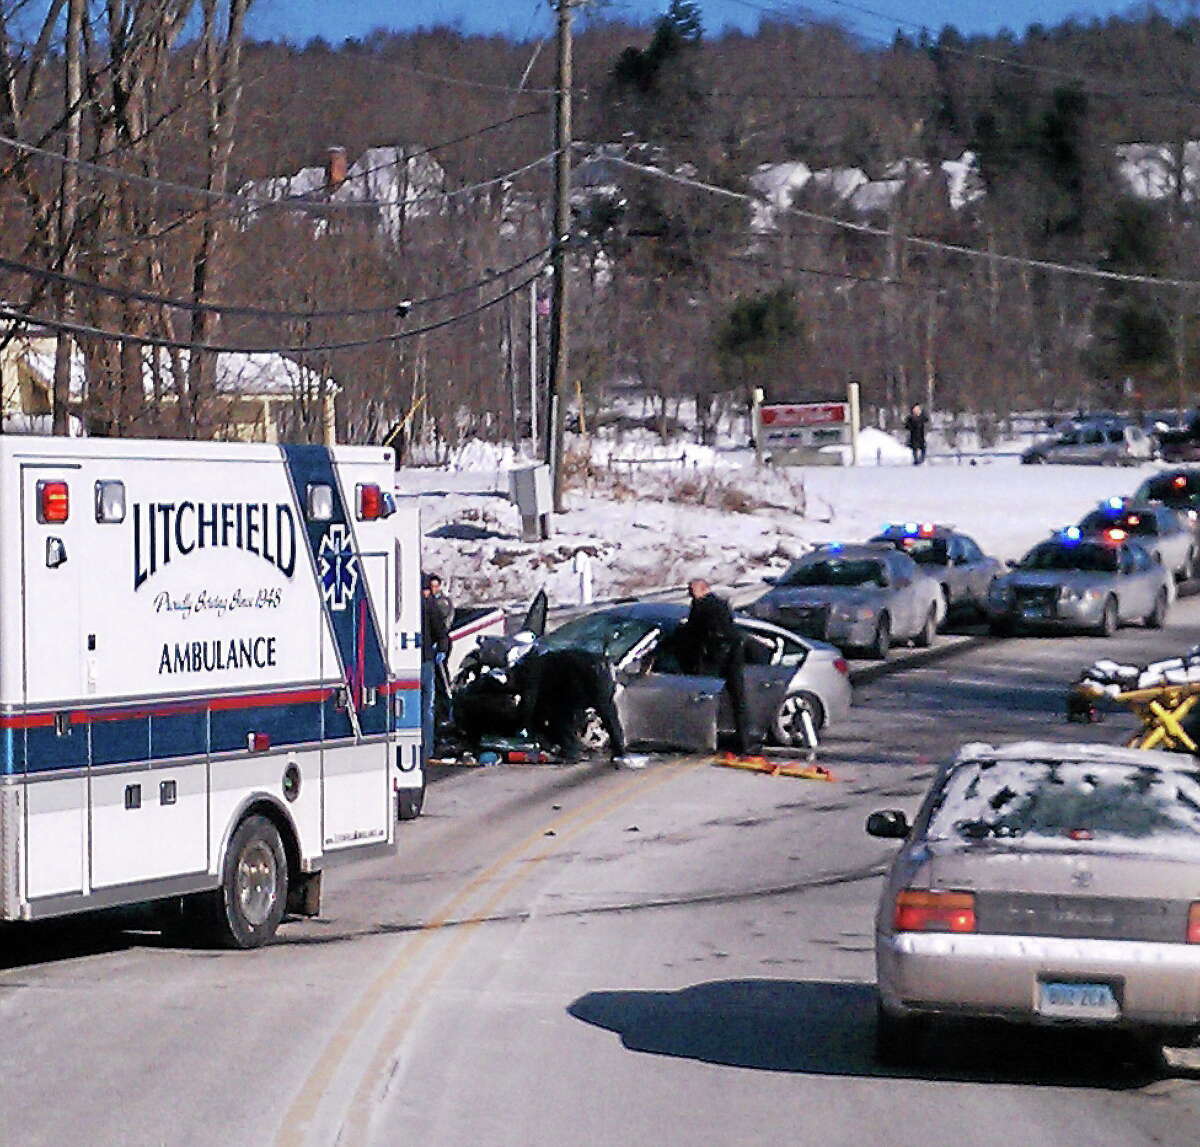 Emergency responders at the scene of a car crash on Route 202 in Litchfield Thursday.